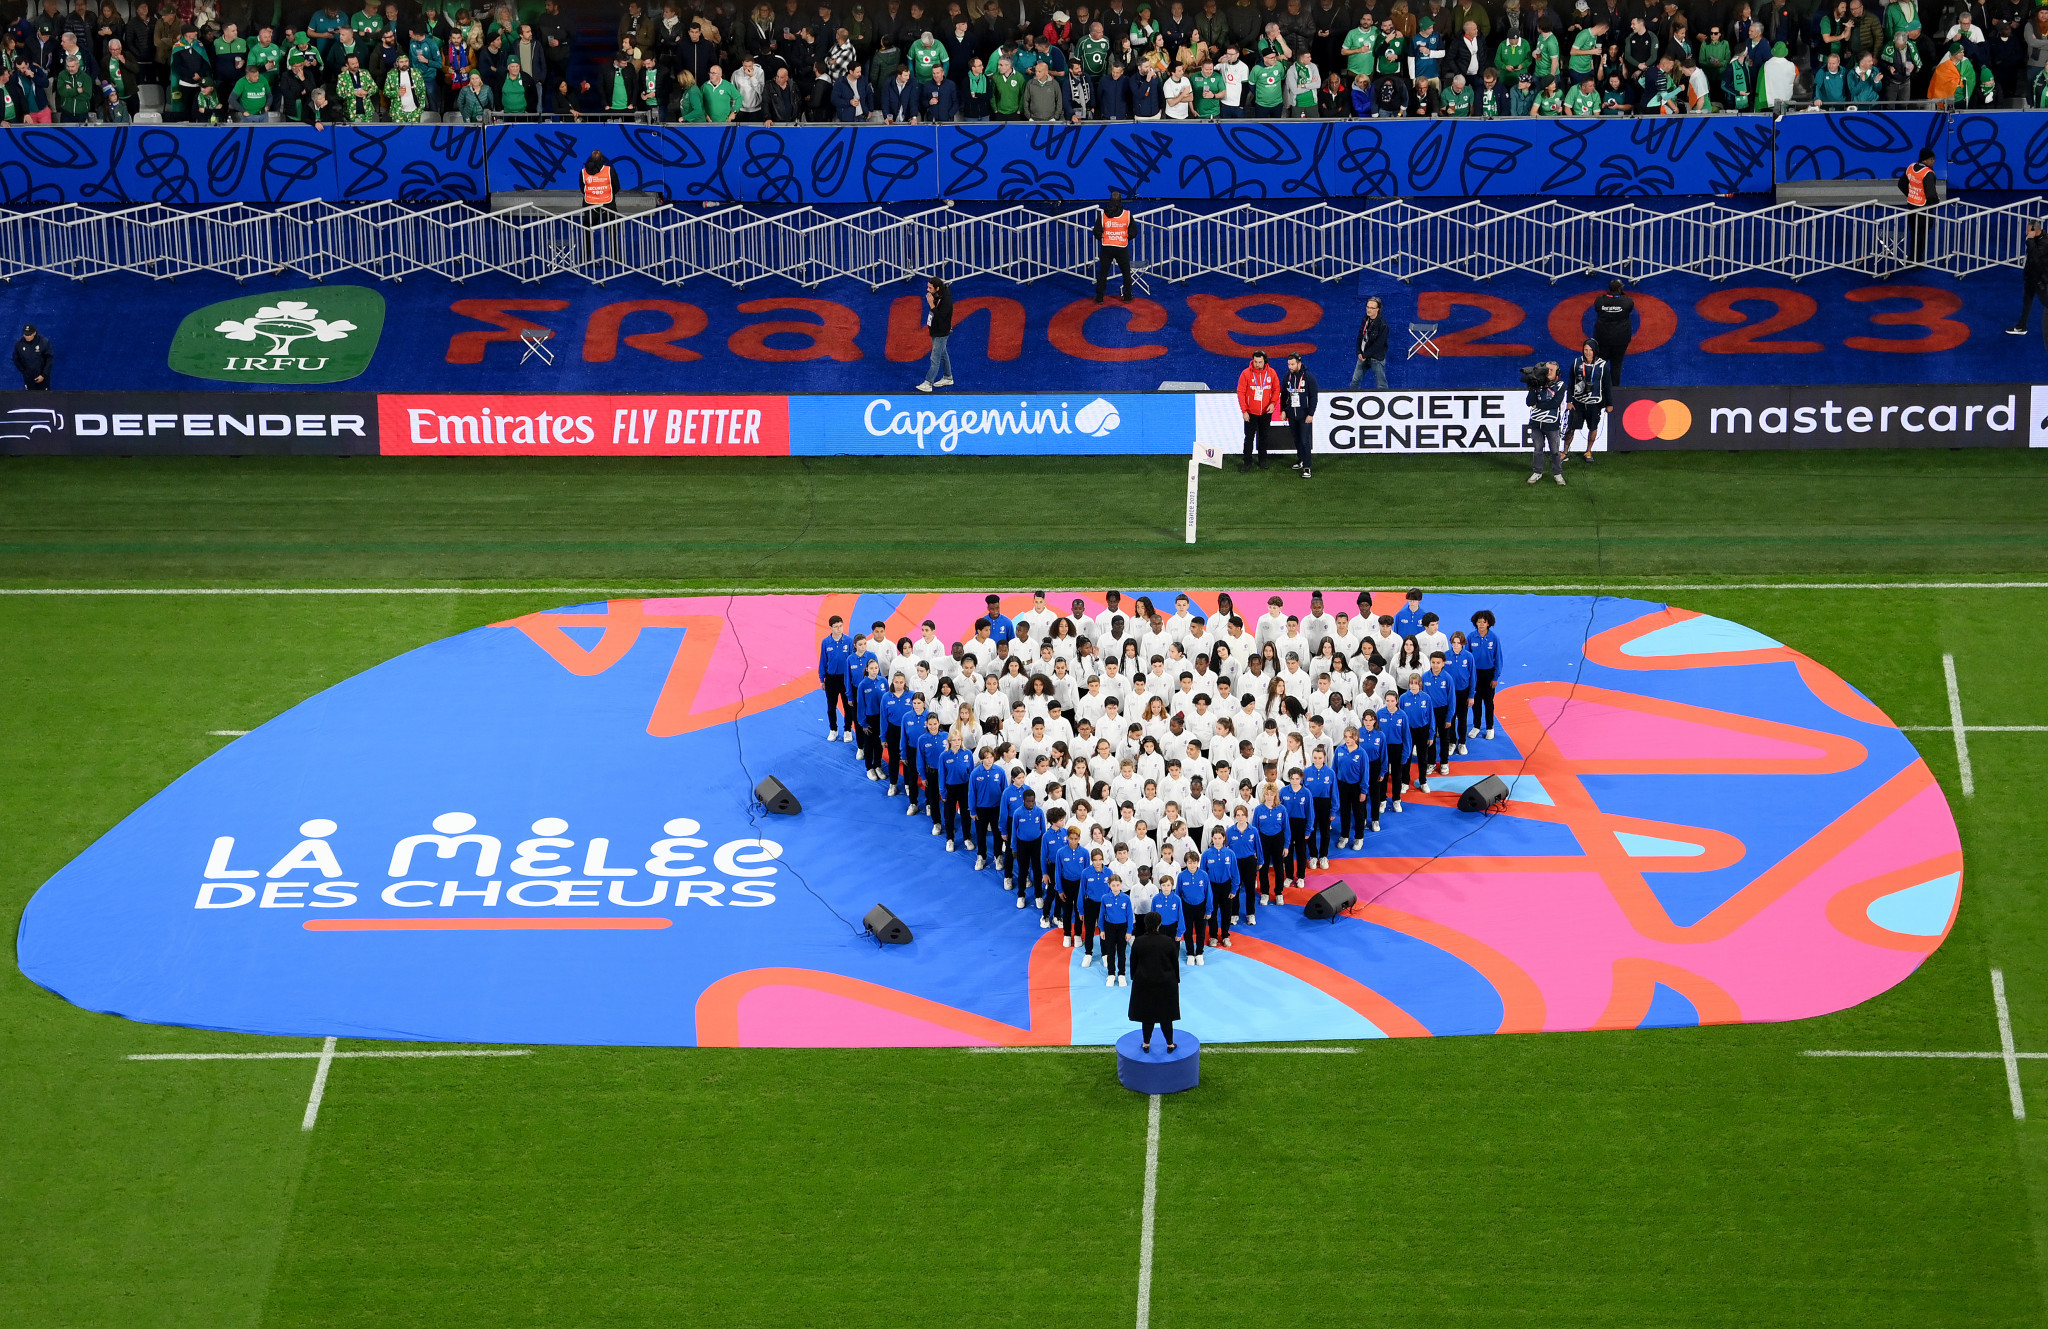 Choirs were present in the stadiums to aid the singing of the national anthems before kick-off ©Getty Images